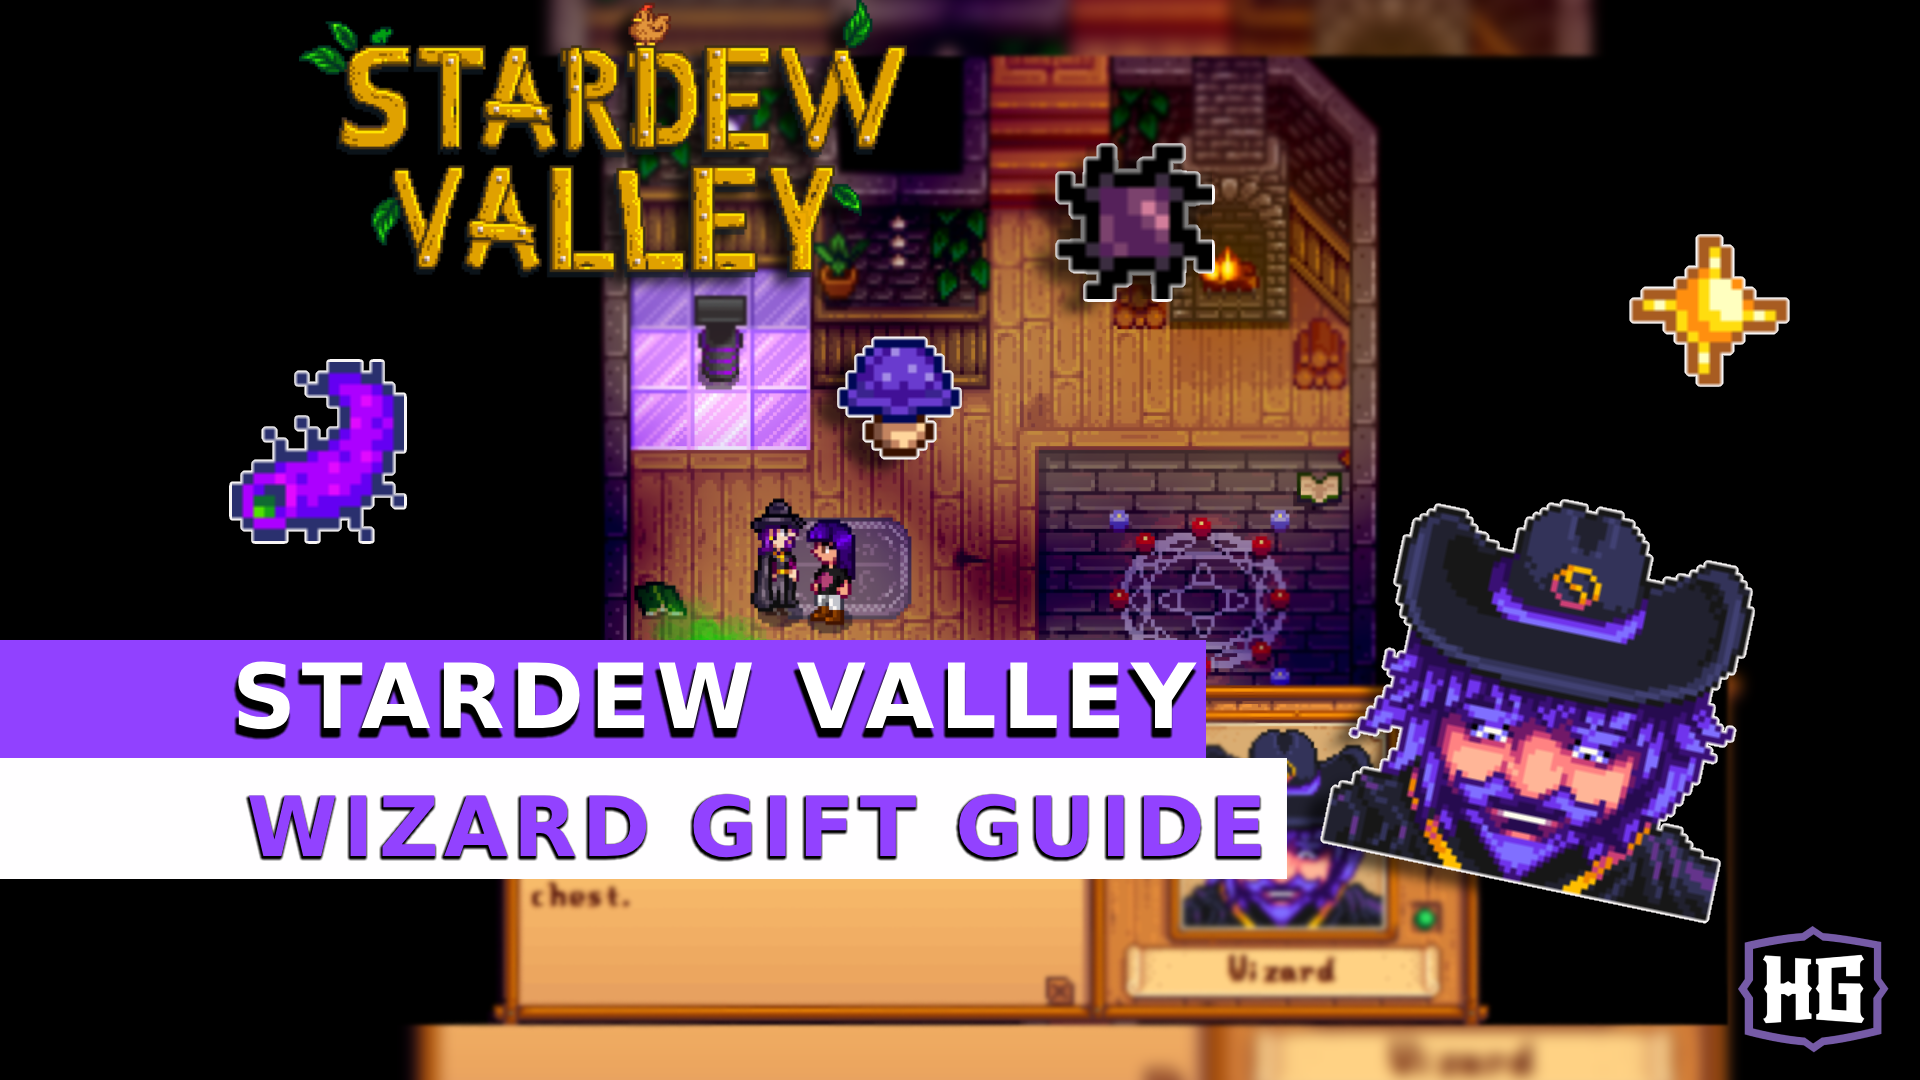 wizard gift guide featured image